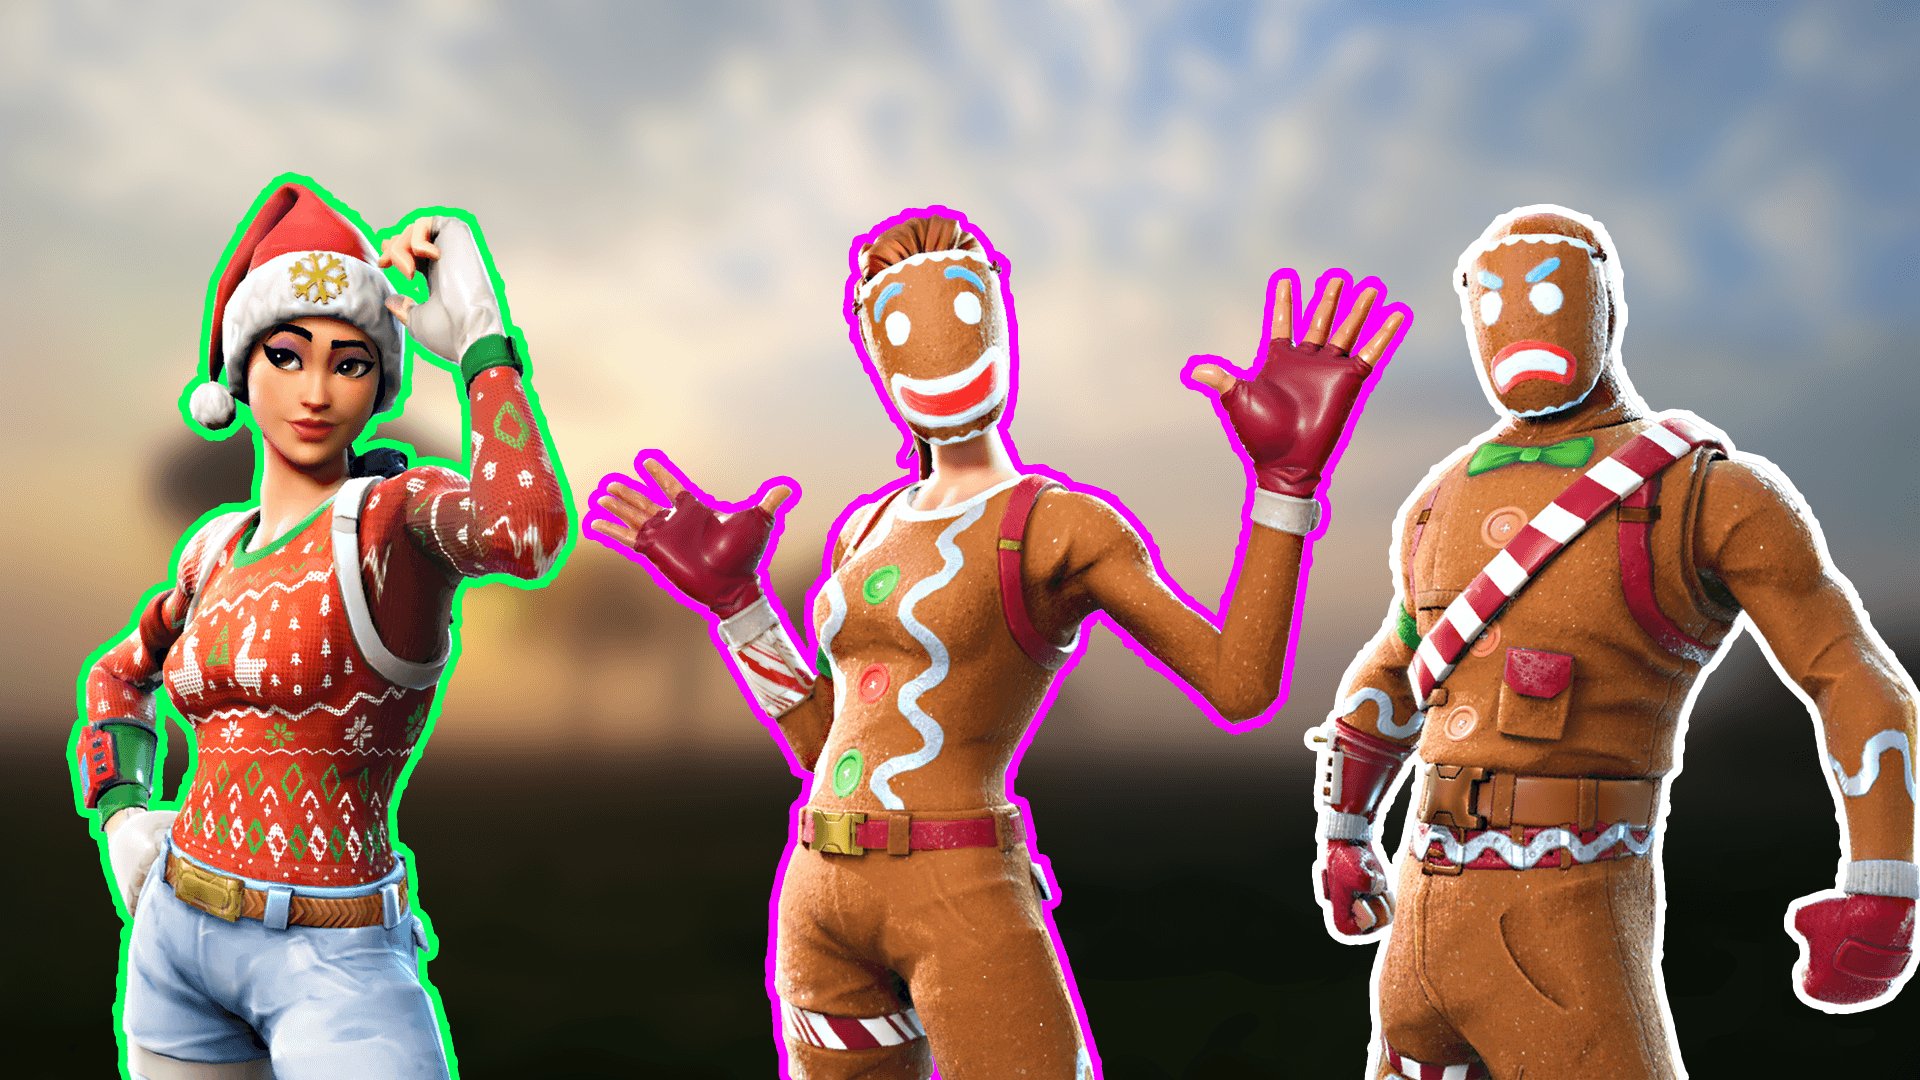 I tried making a wallpaper using some christmas skins!